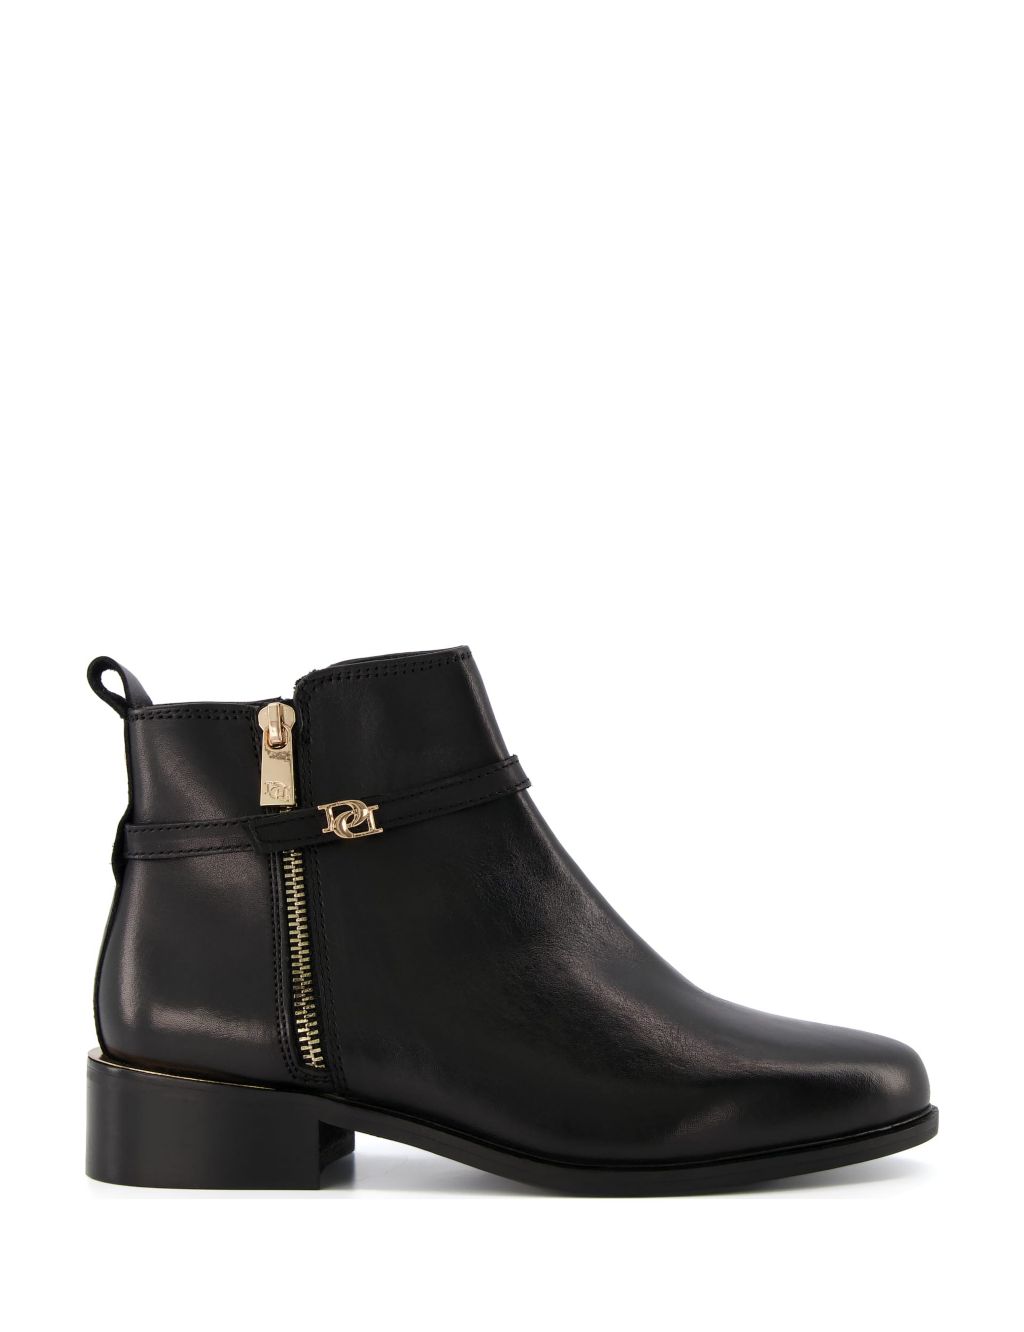 Leather Buckle Block Heel Ankle Boots image 1